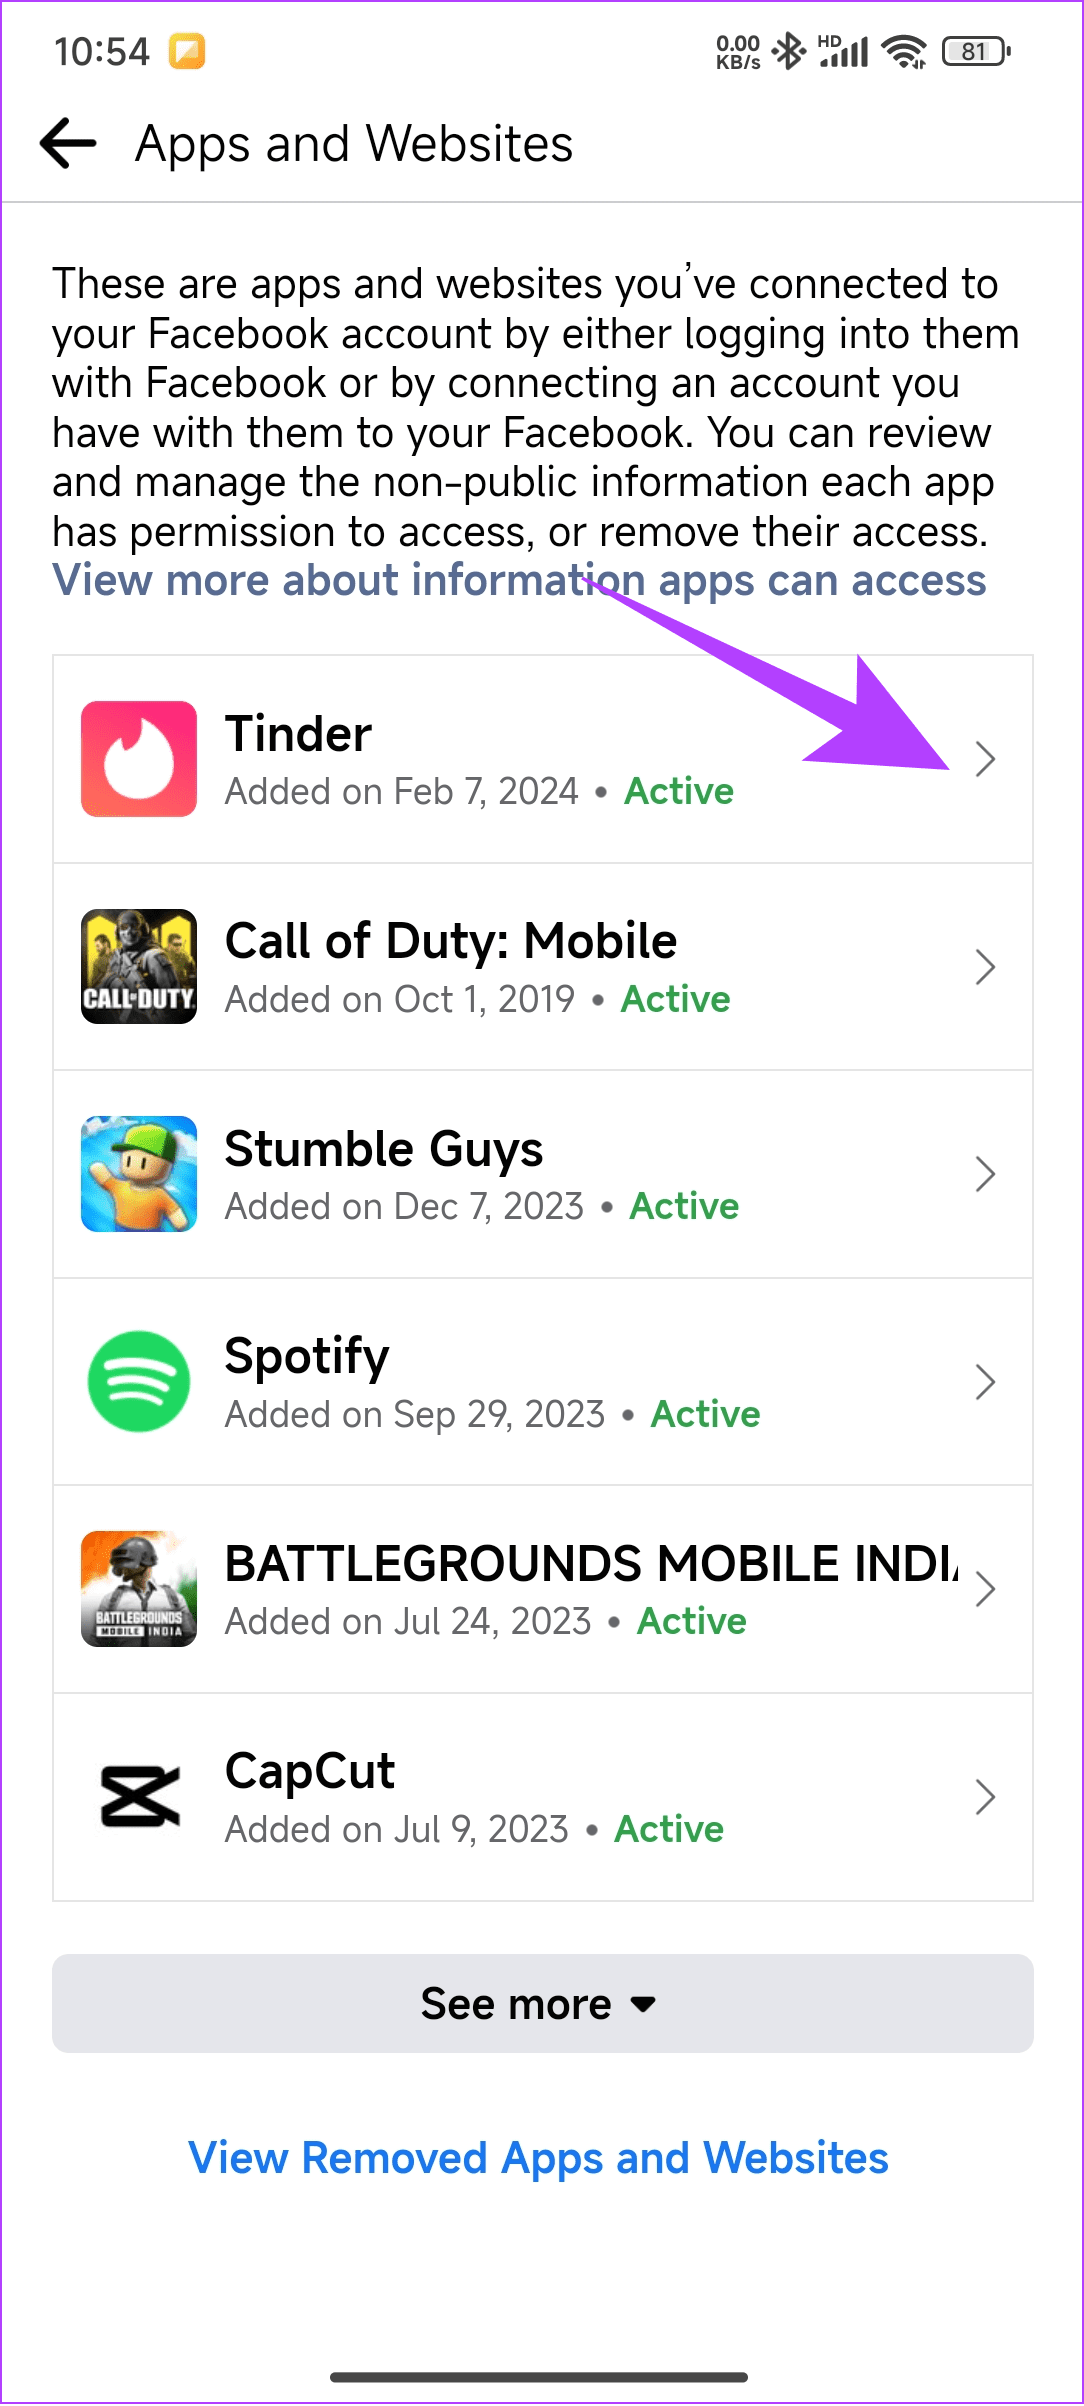 Choose Tinder from the list